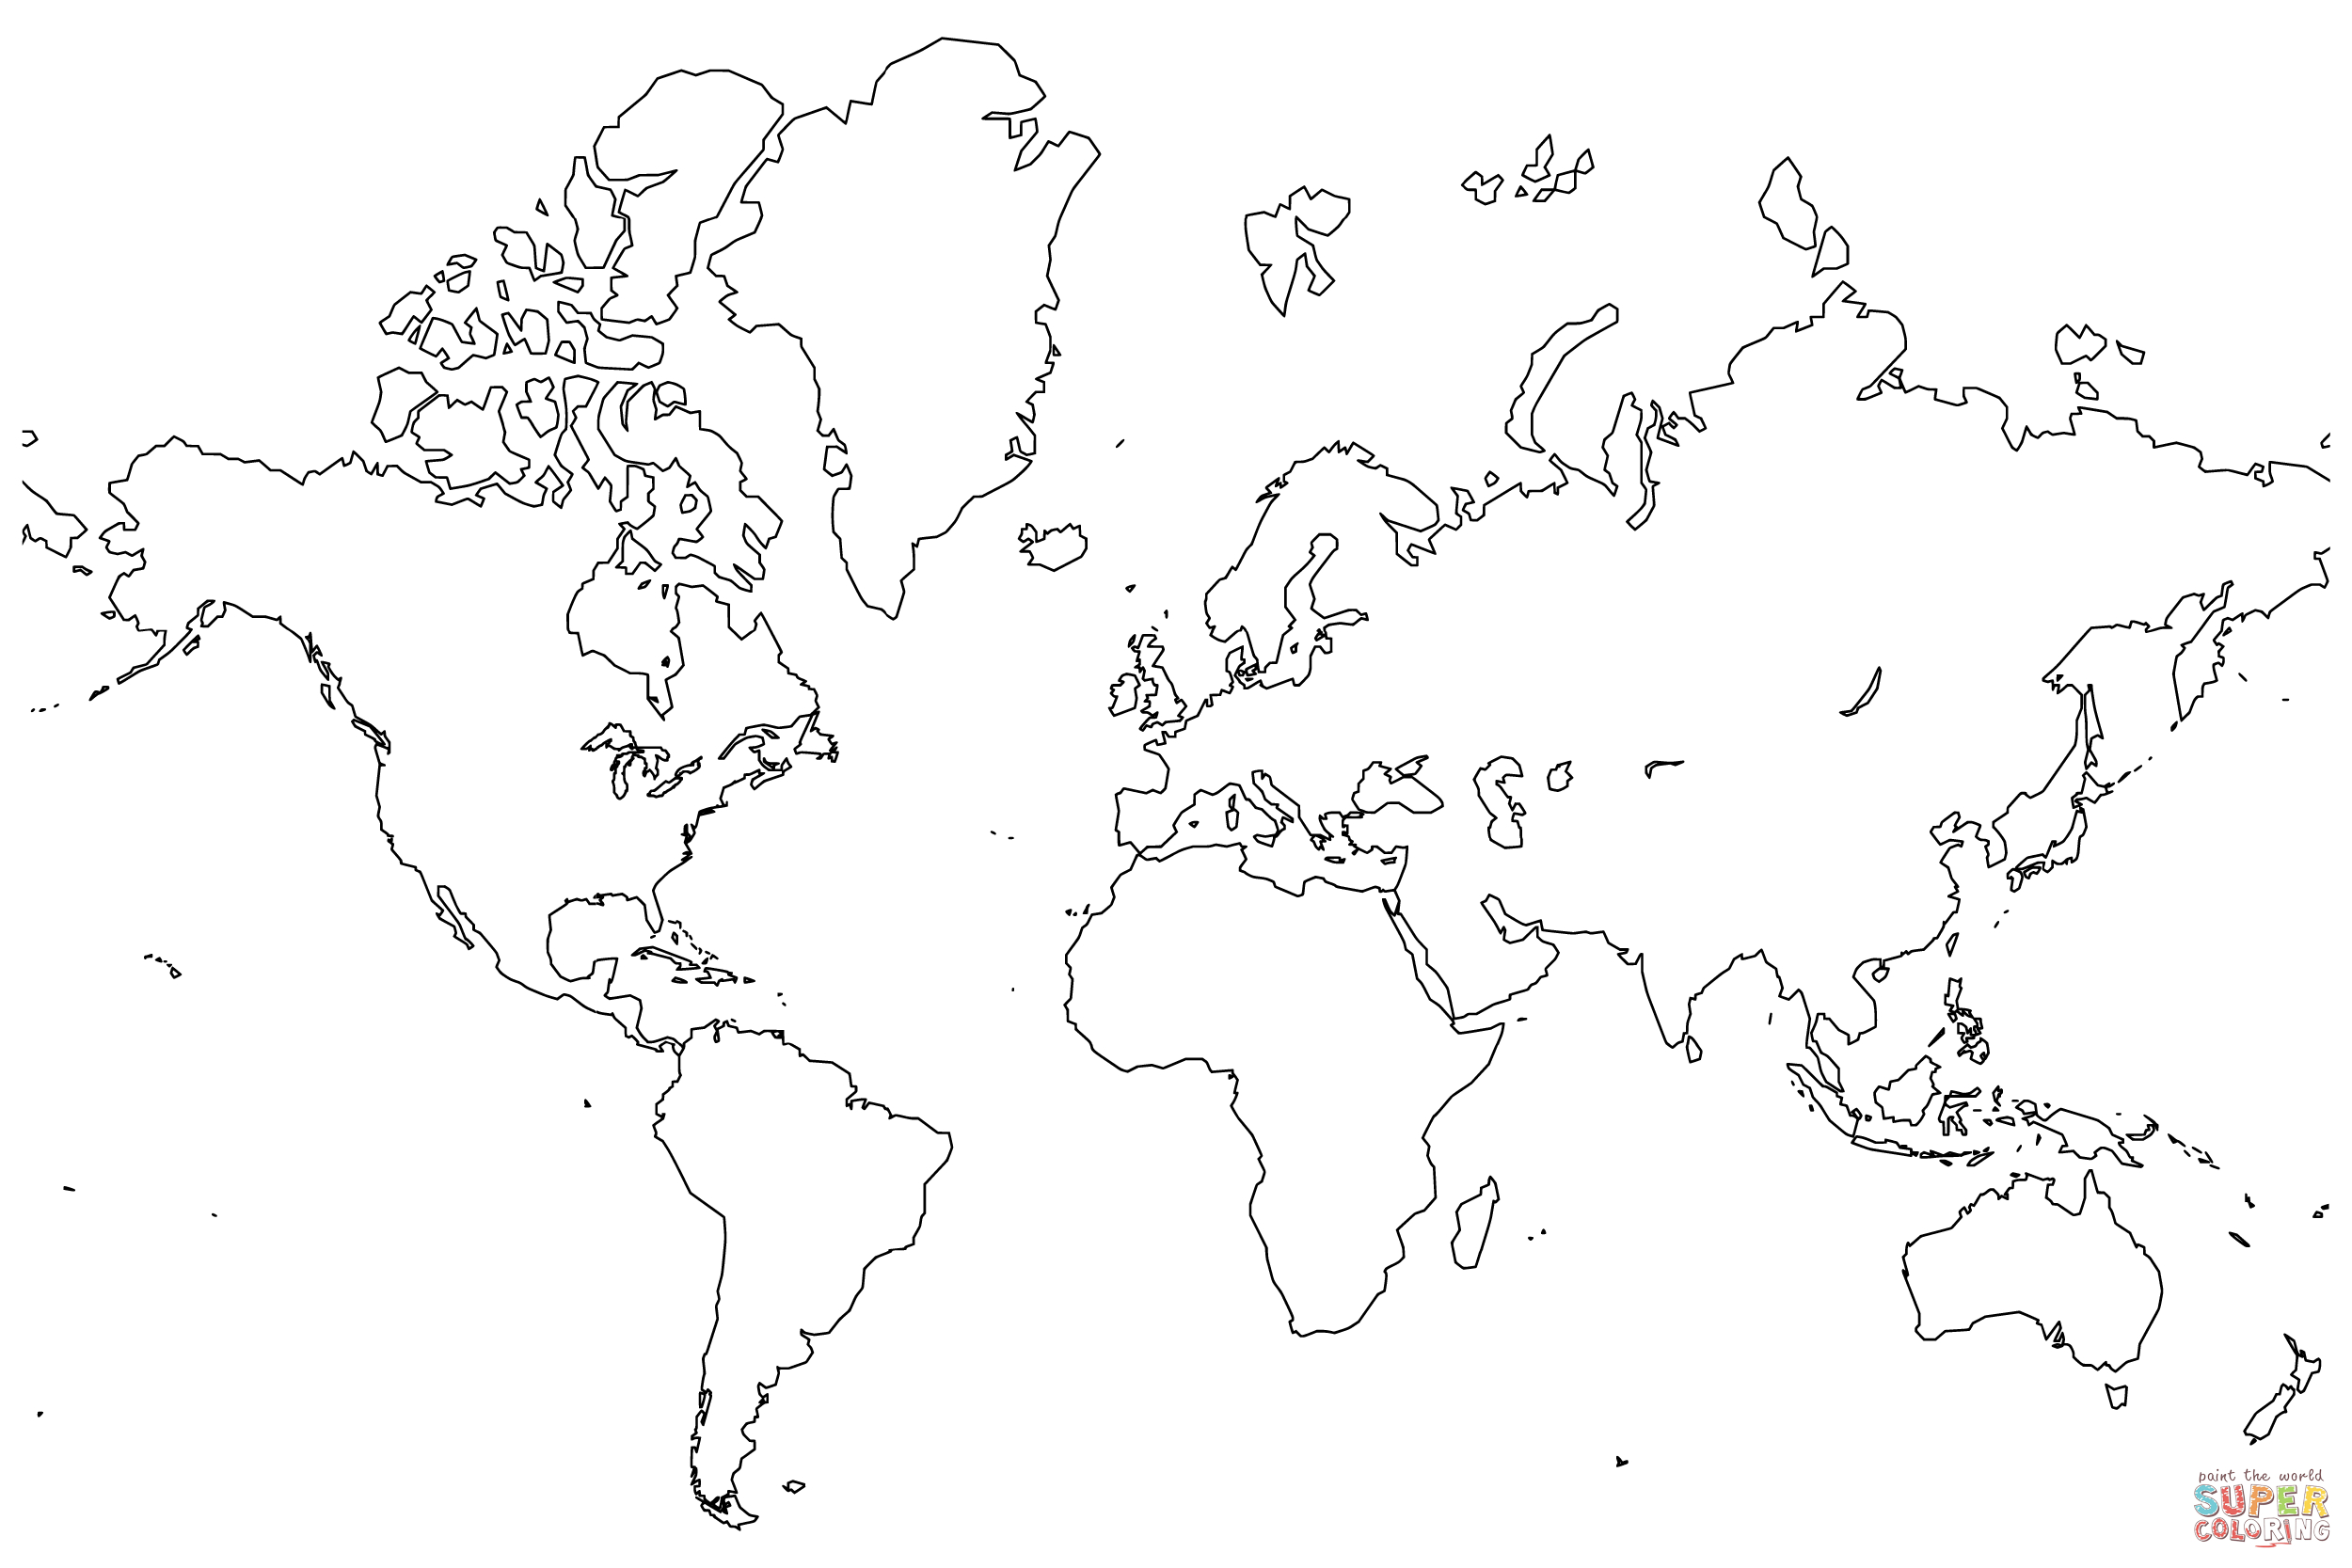 Coloring Pages Of The World Blank Map Of The World Coloring Page Free Printable Coloring Pages